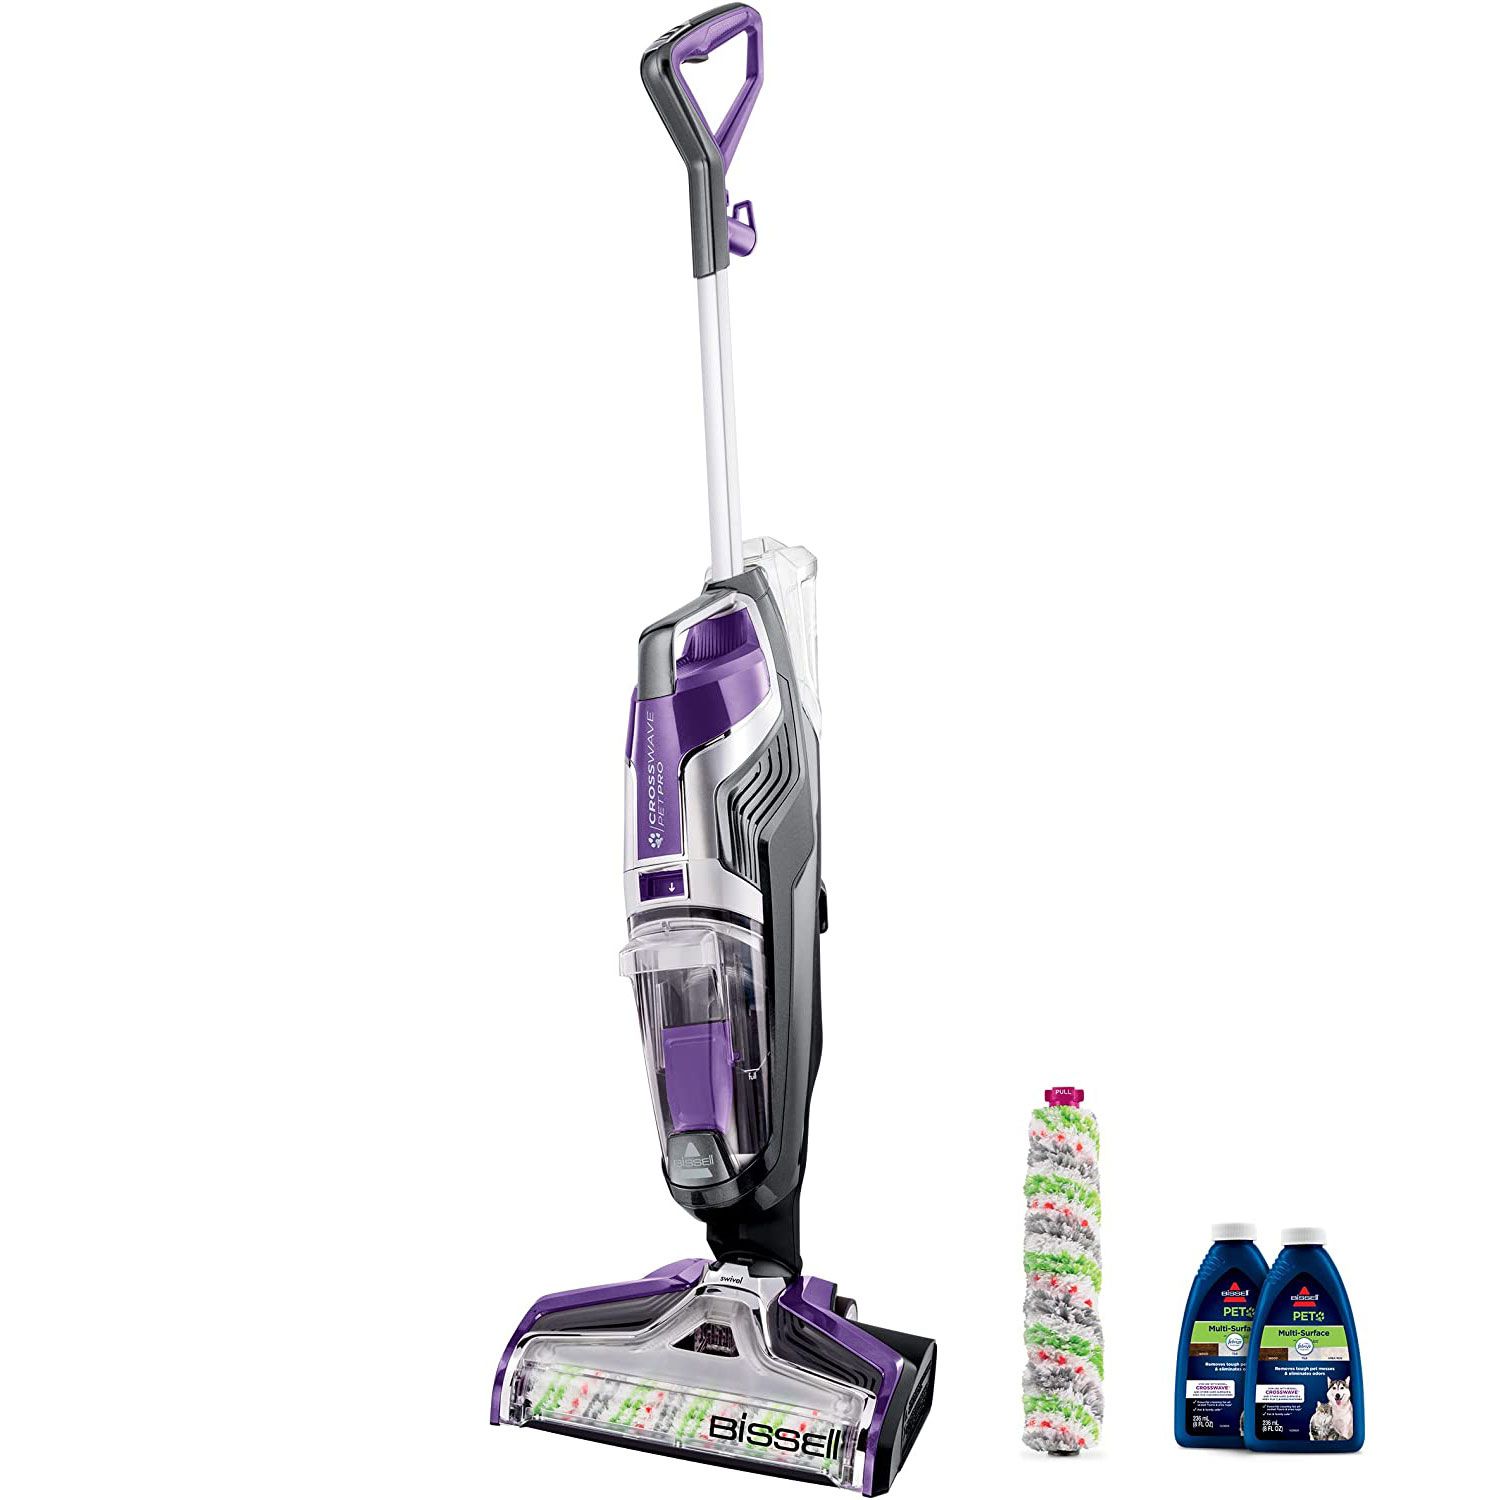 Bissell Crosswave Pet Pro All in One Wet Dry Vacuum Cleaner and Mop for Hard Floors and Area Rugs